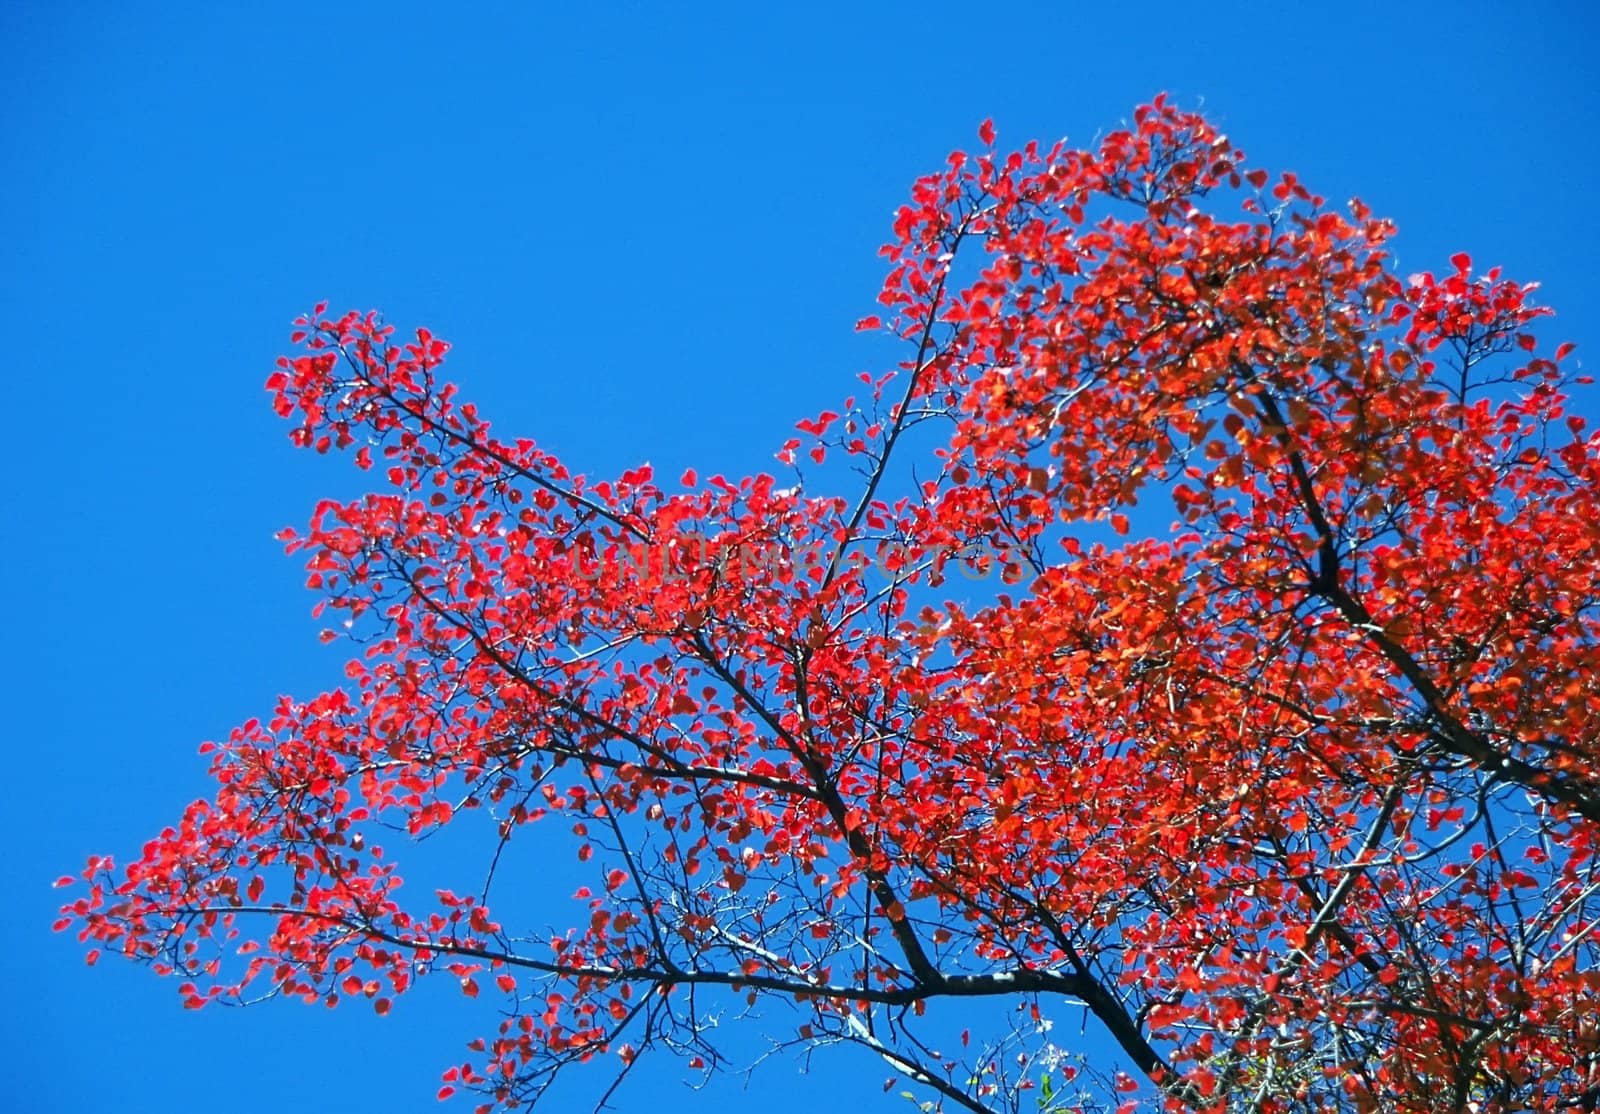 More colorful leaves under the blue sky